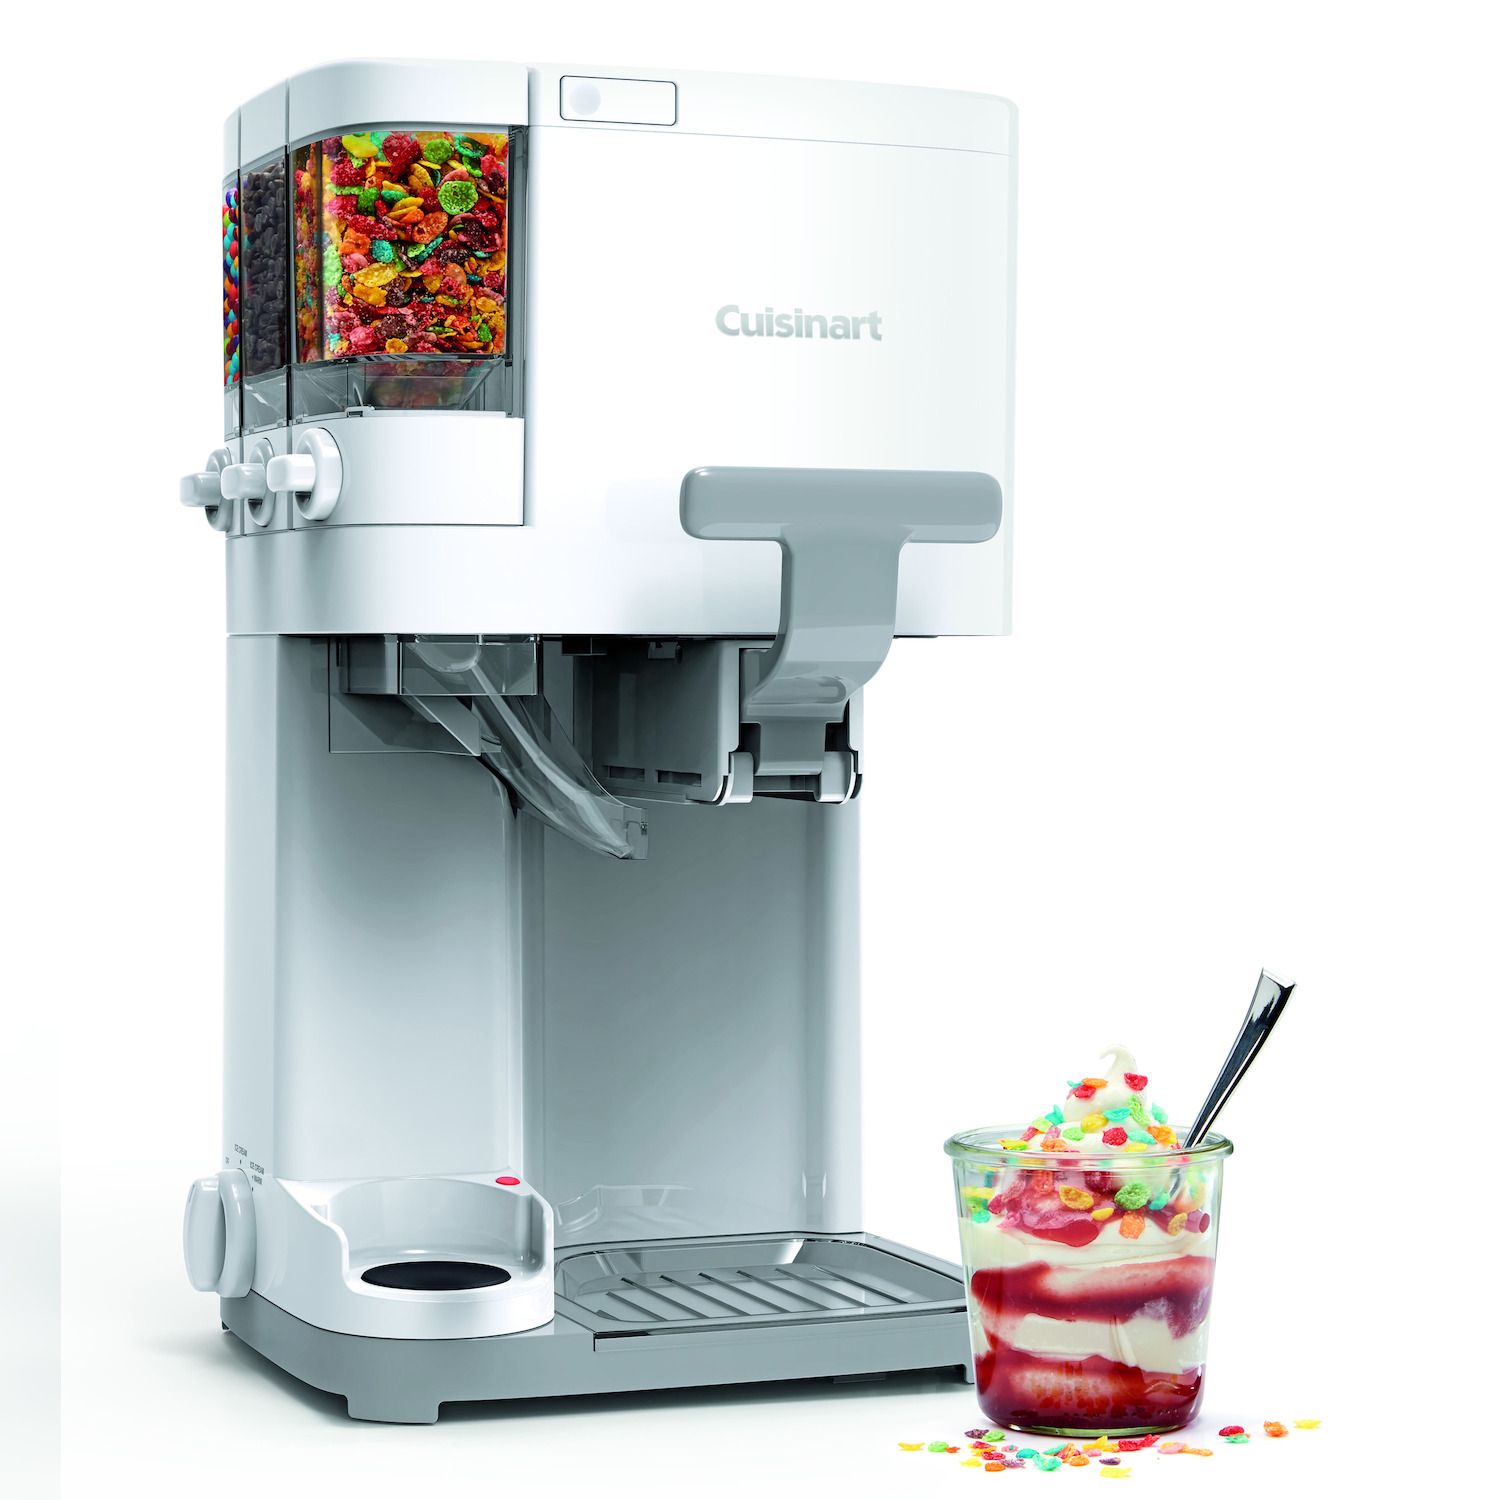 Ice Cream Maker  Getting Started with the Ninja™ CREAMi® Deluxe 